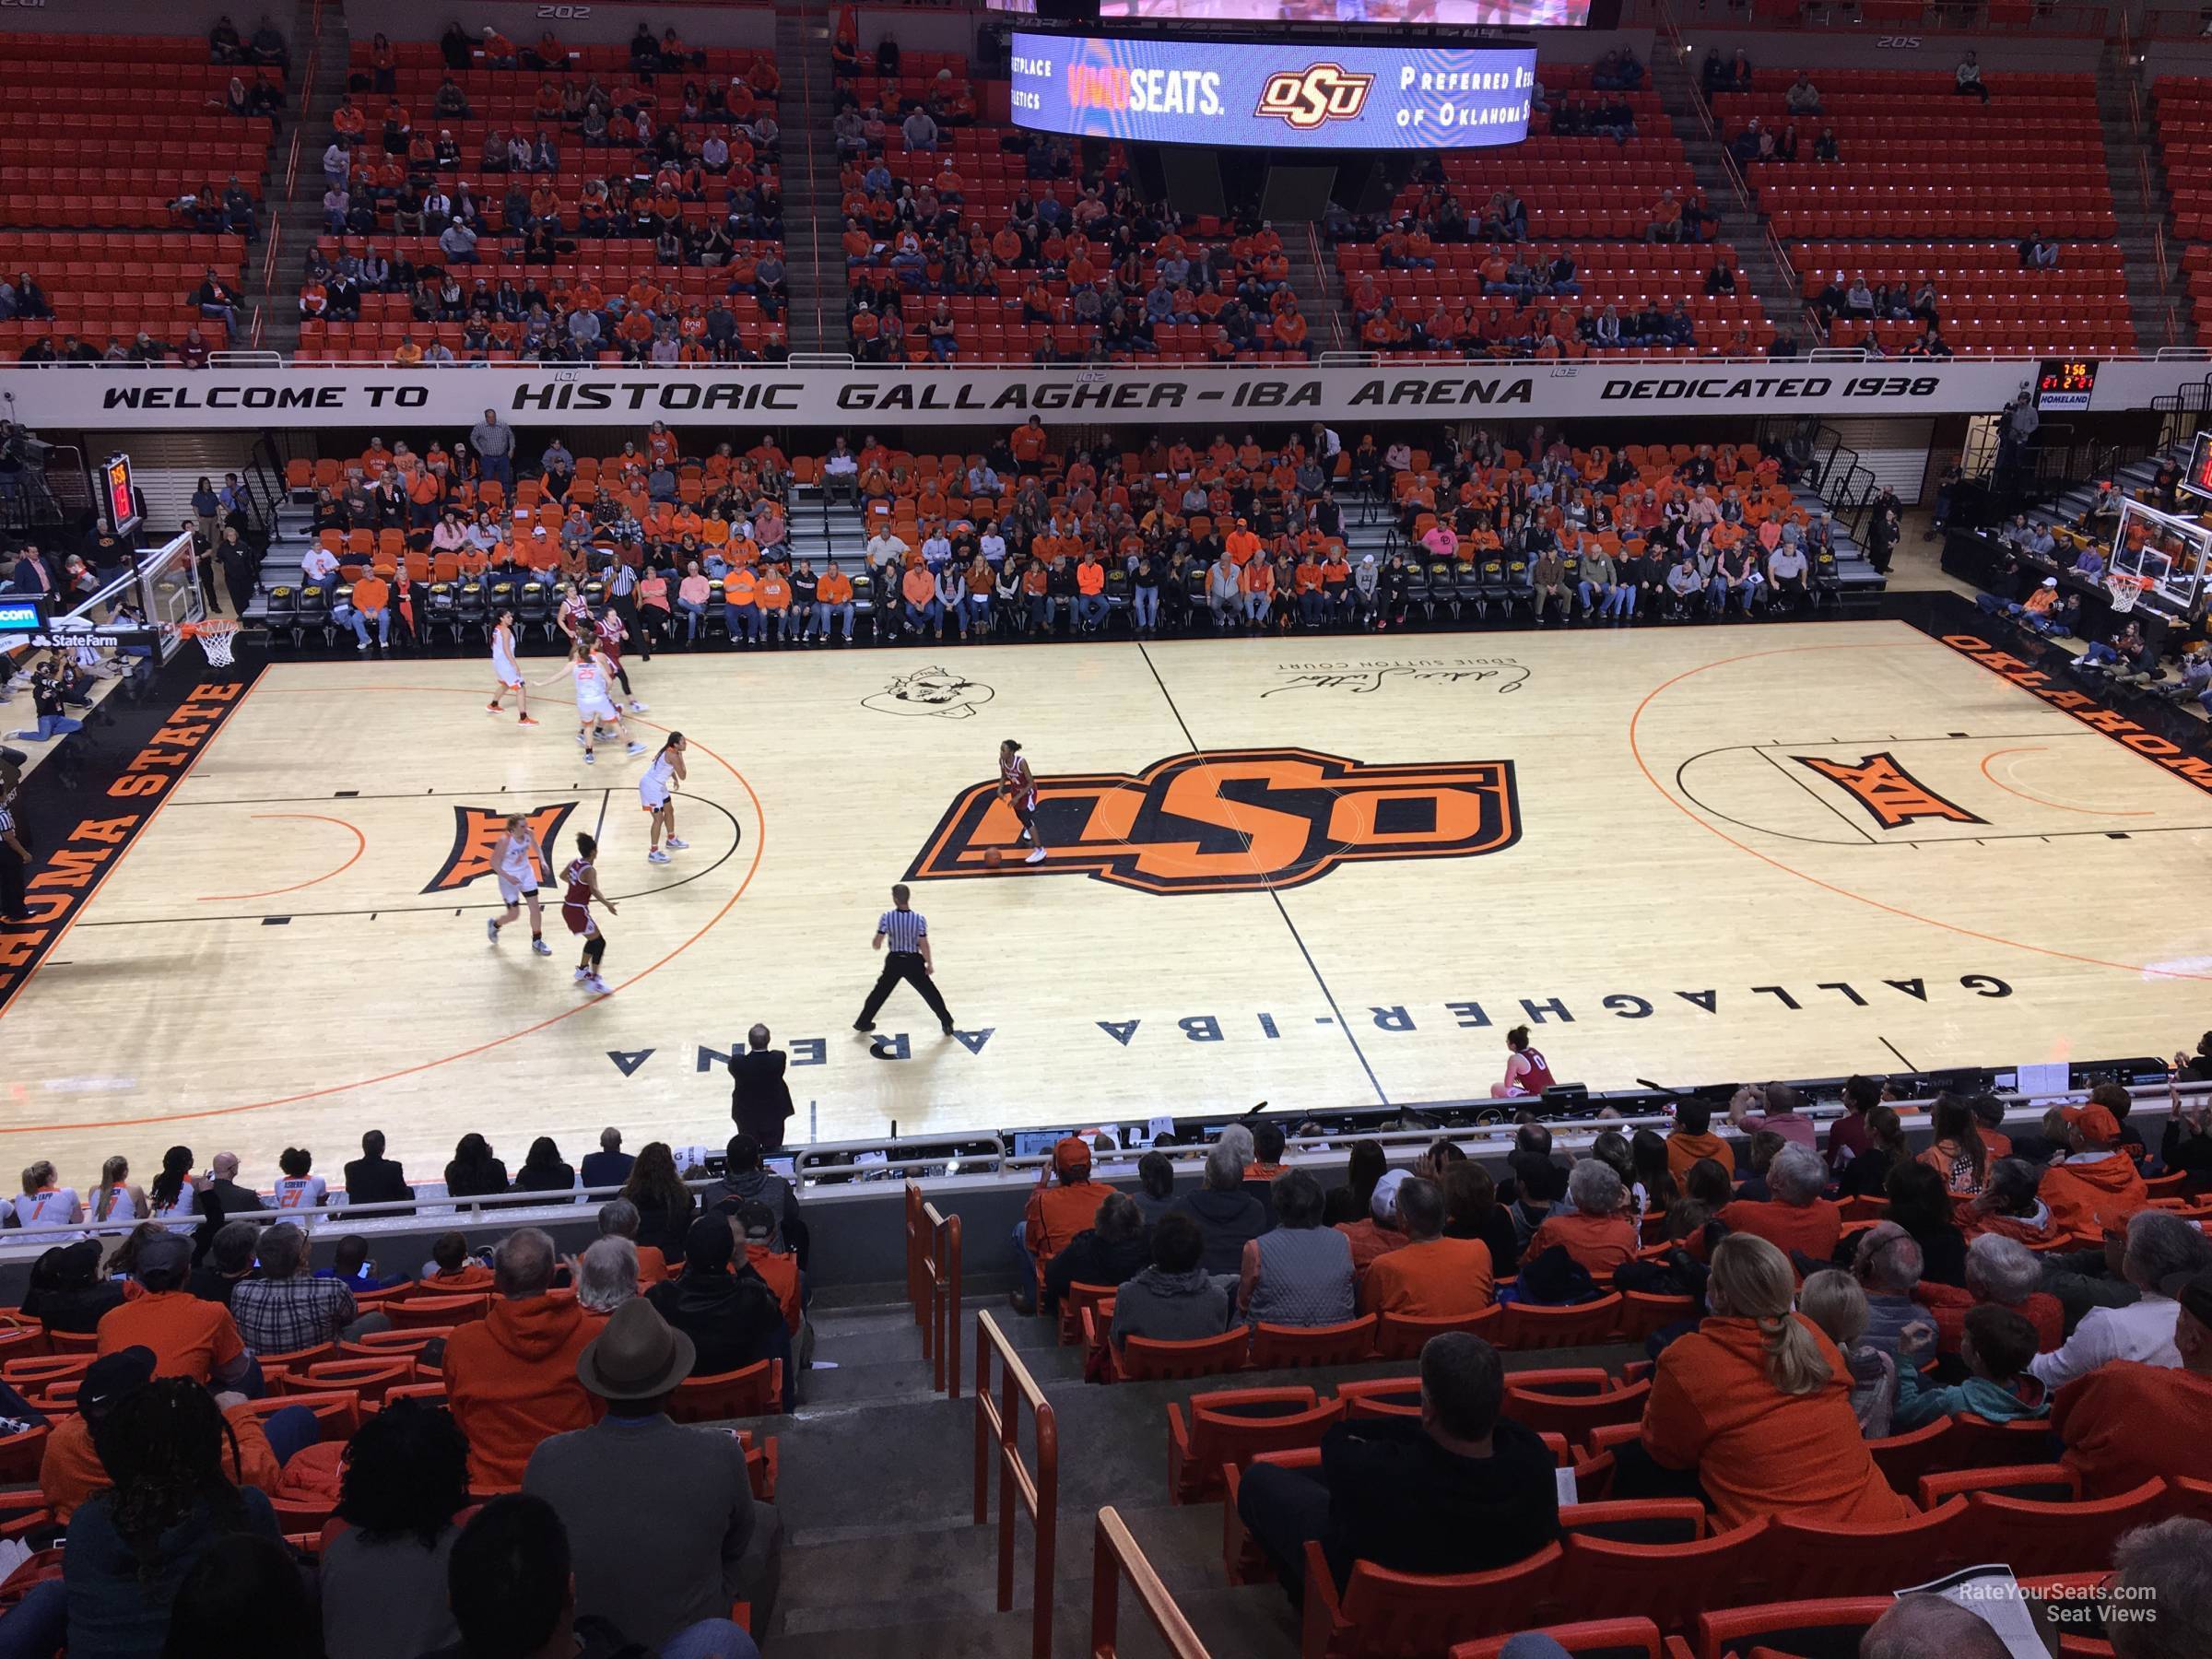 section 214, row 13 seat view  - gallagher-iba arena